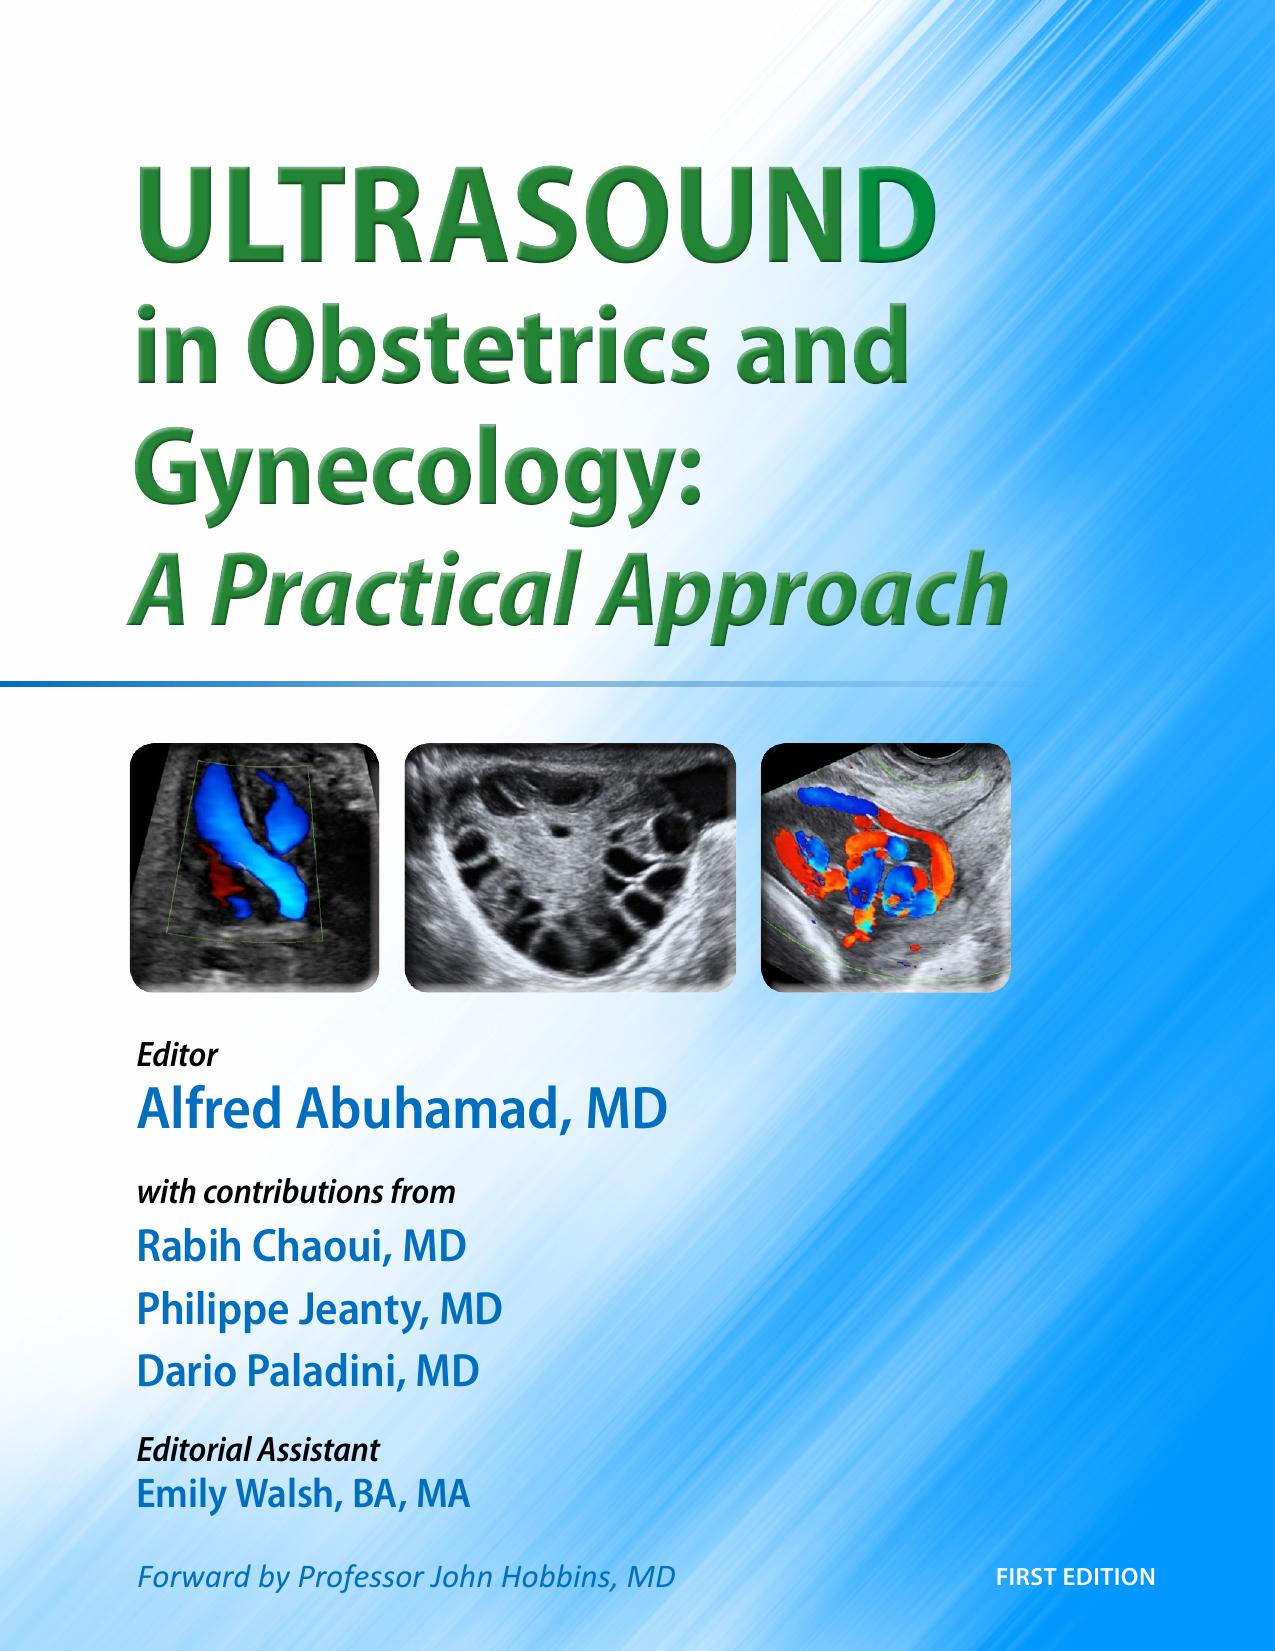 Ultrasound in obstetrics and gynecology 2014